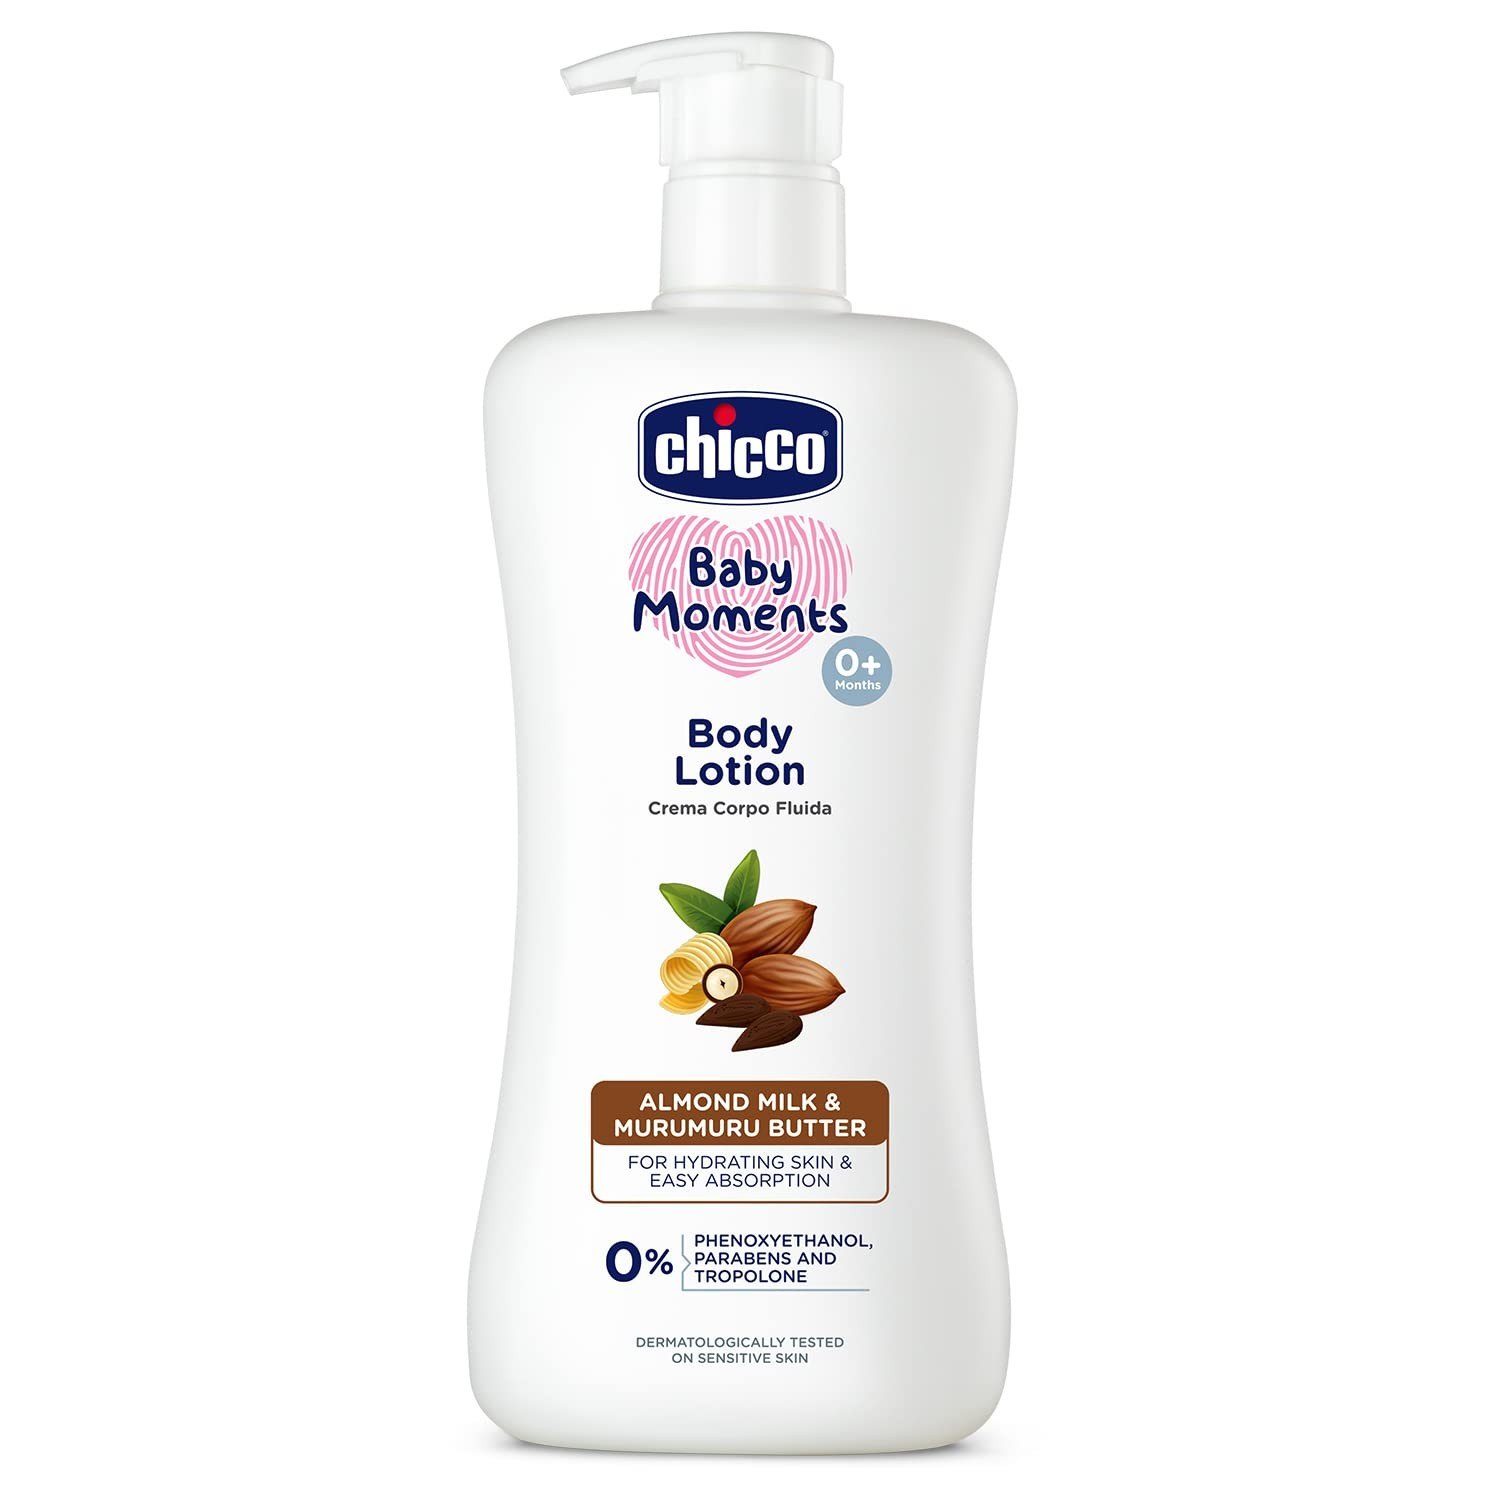 Chicco Baby Moments Body Lotion, New Advanced formula with Natural Ingredients for Daily Moisturization, Suitable for Baby’s moisturized skin, No Phenoxyethanol and Parabens (500ml)